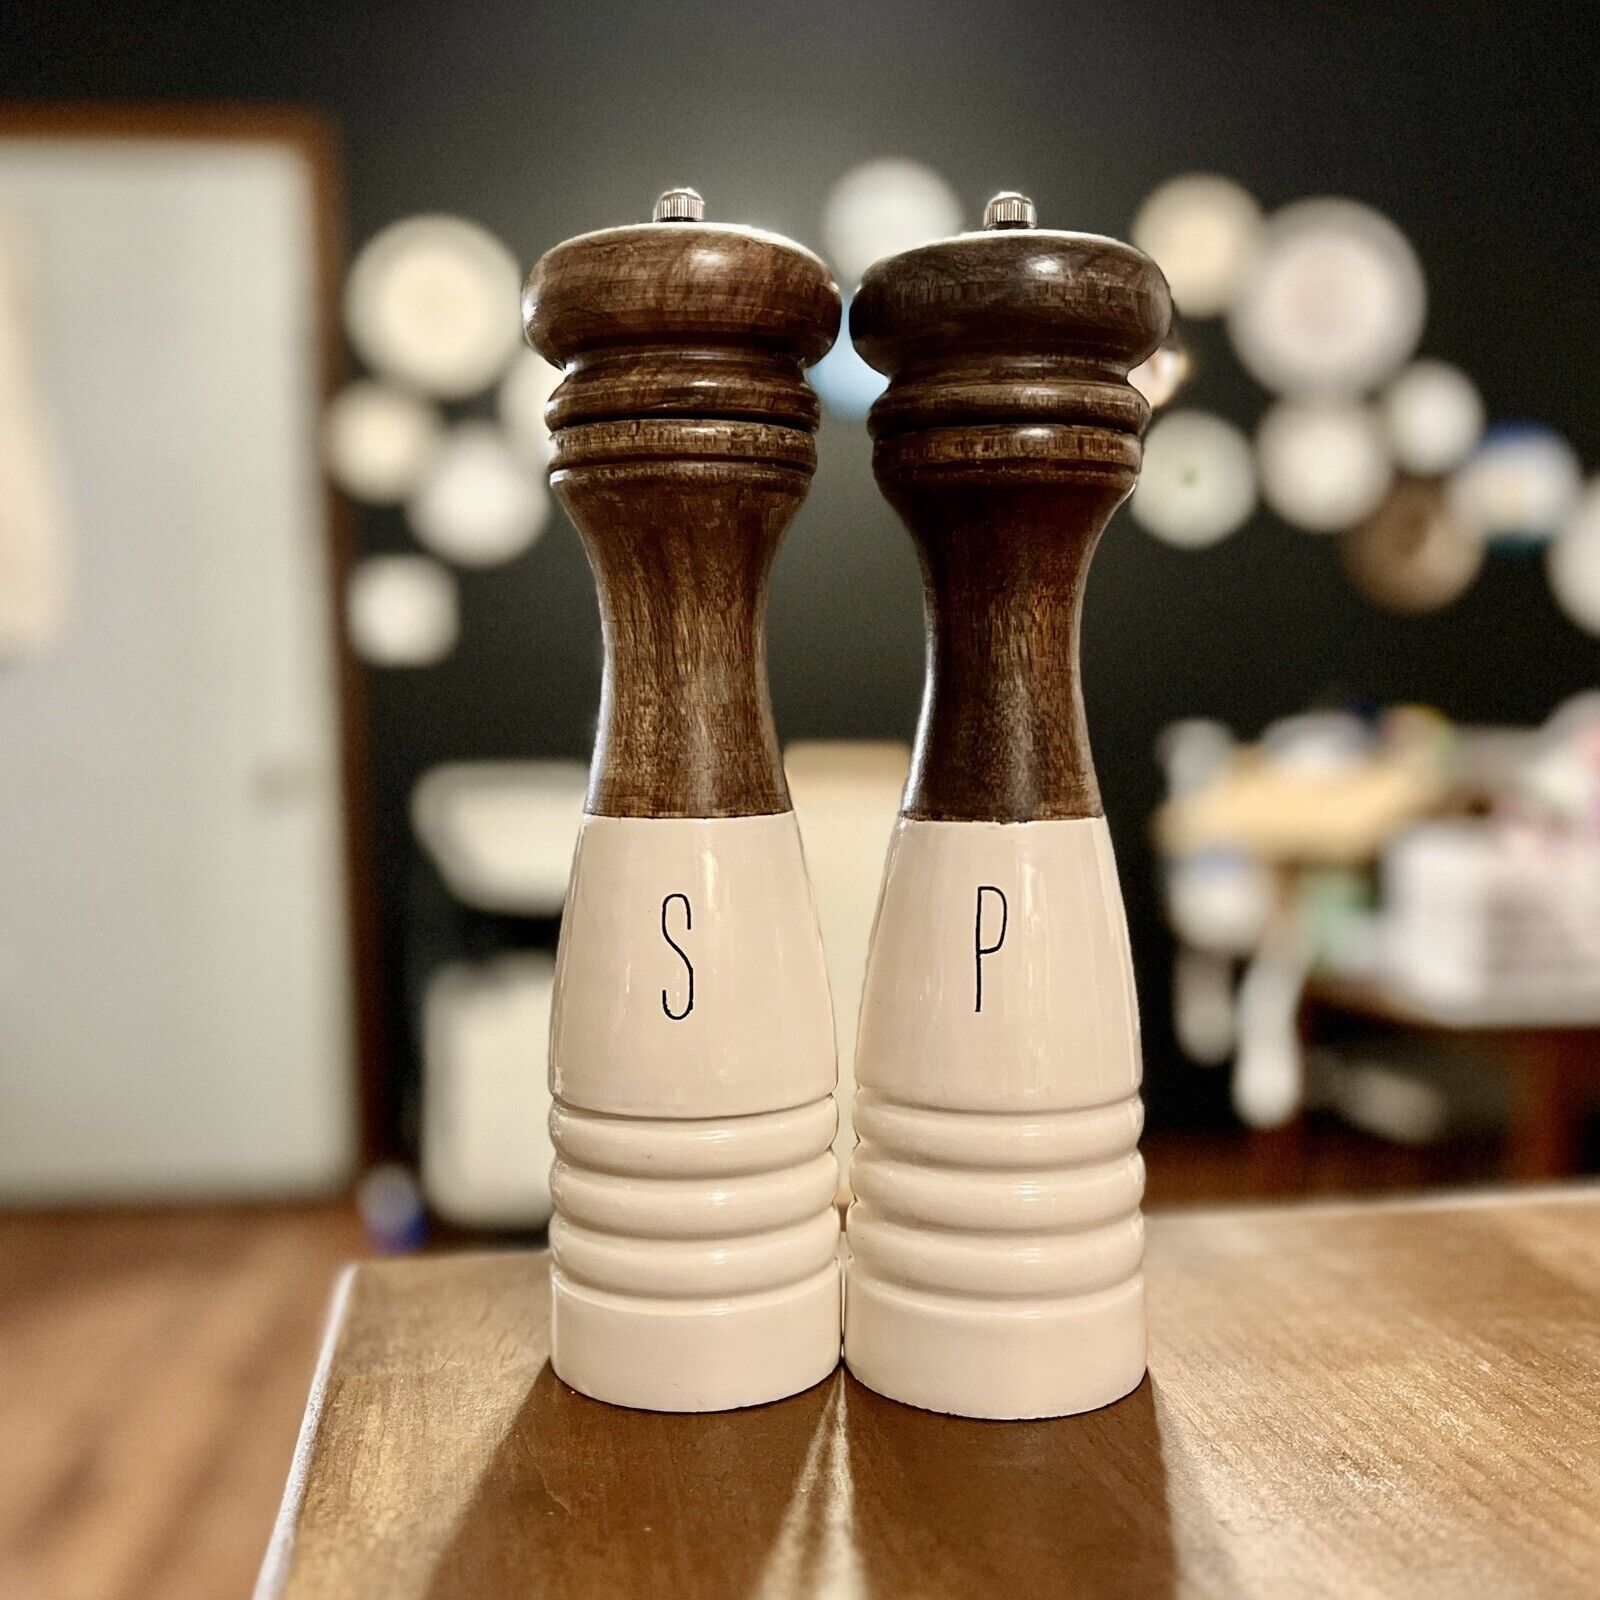 Farmhouse Mudpie Salt And Pepper Grinder Shaker Tall Classic